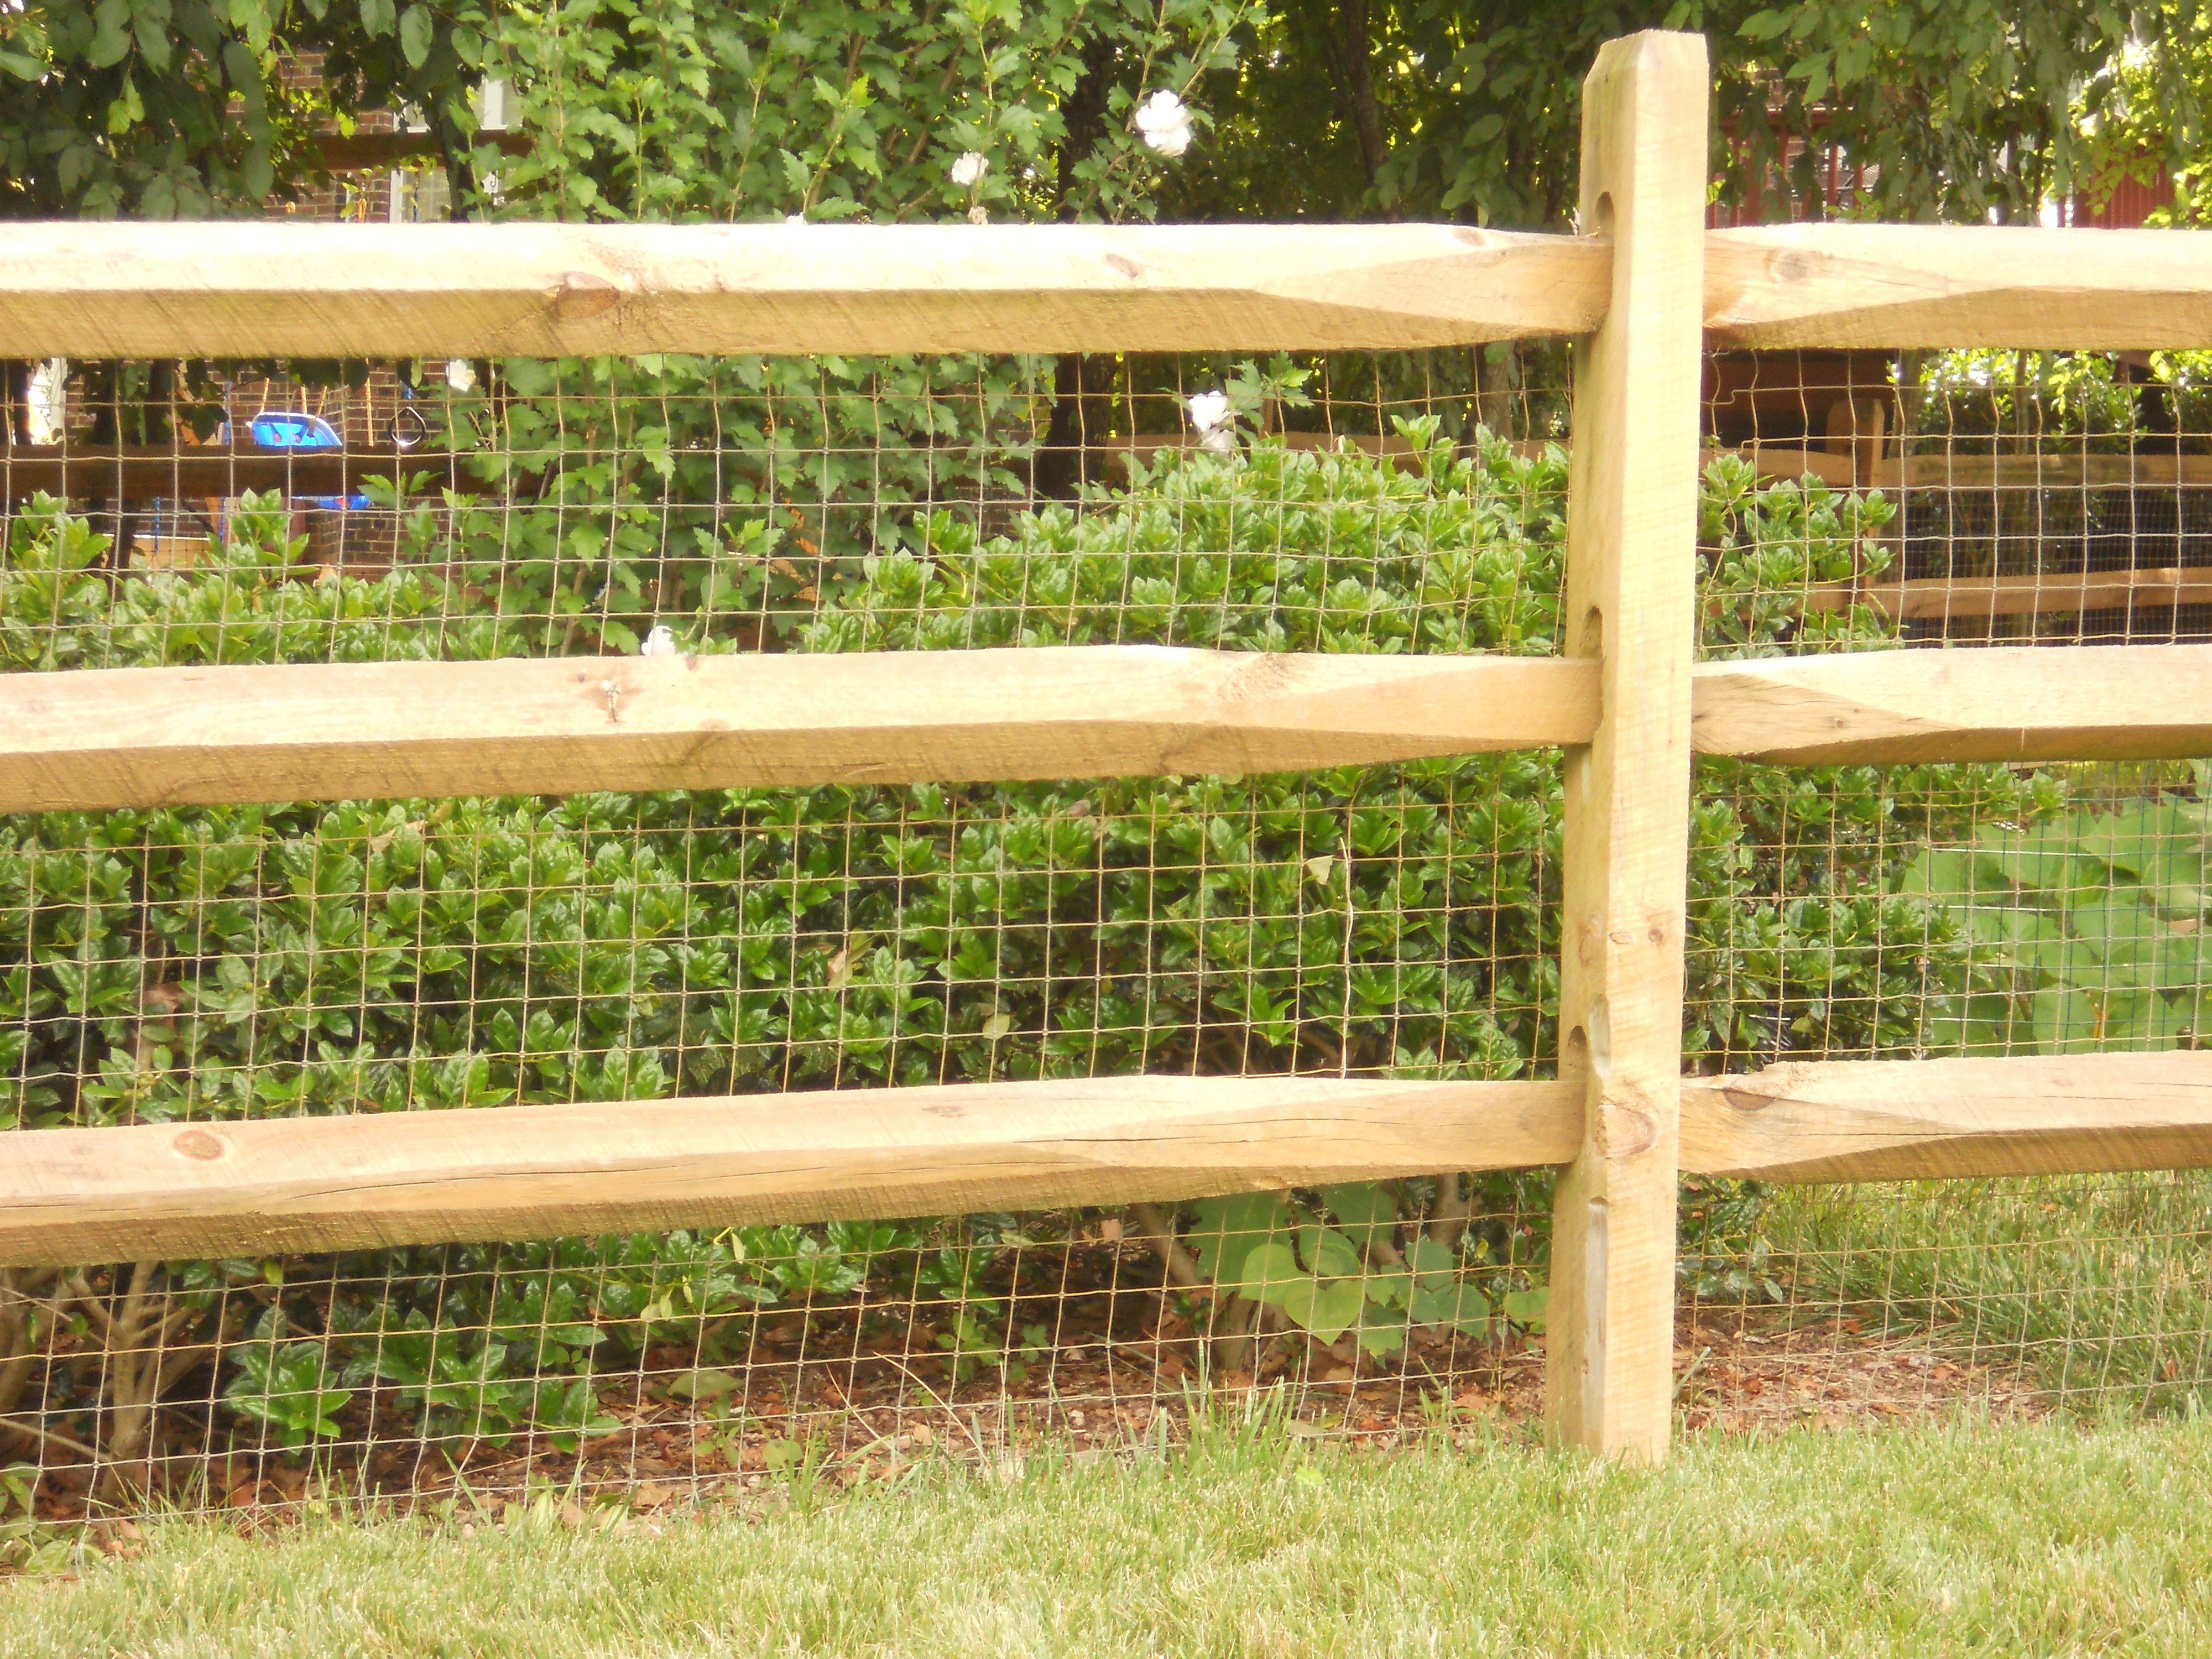 Split Rail Fence W Wire Behindcreate Area That The Animals Can regarding measurements 4000 X 3000